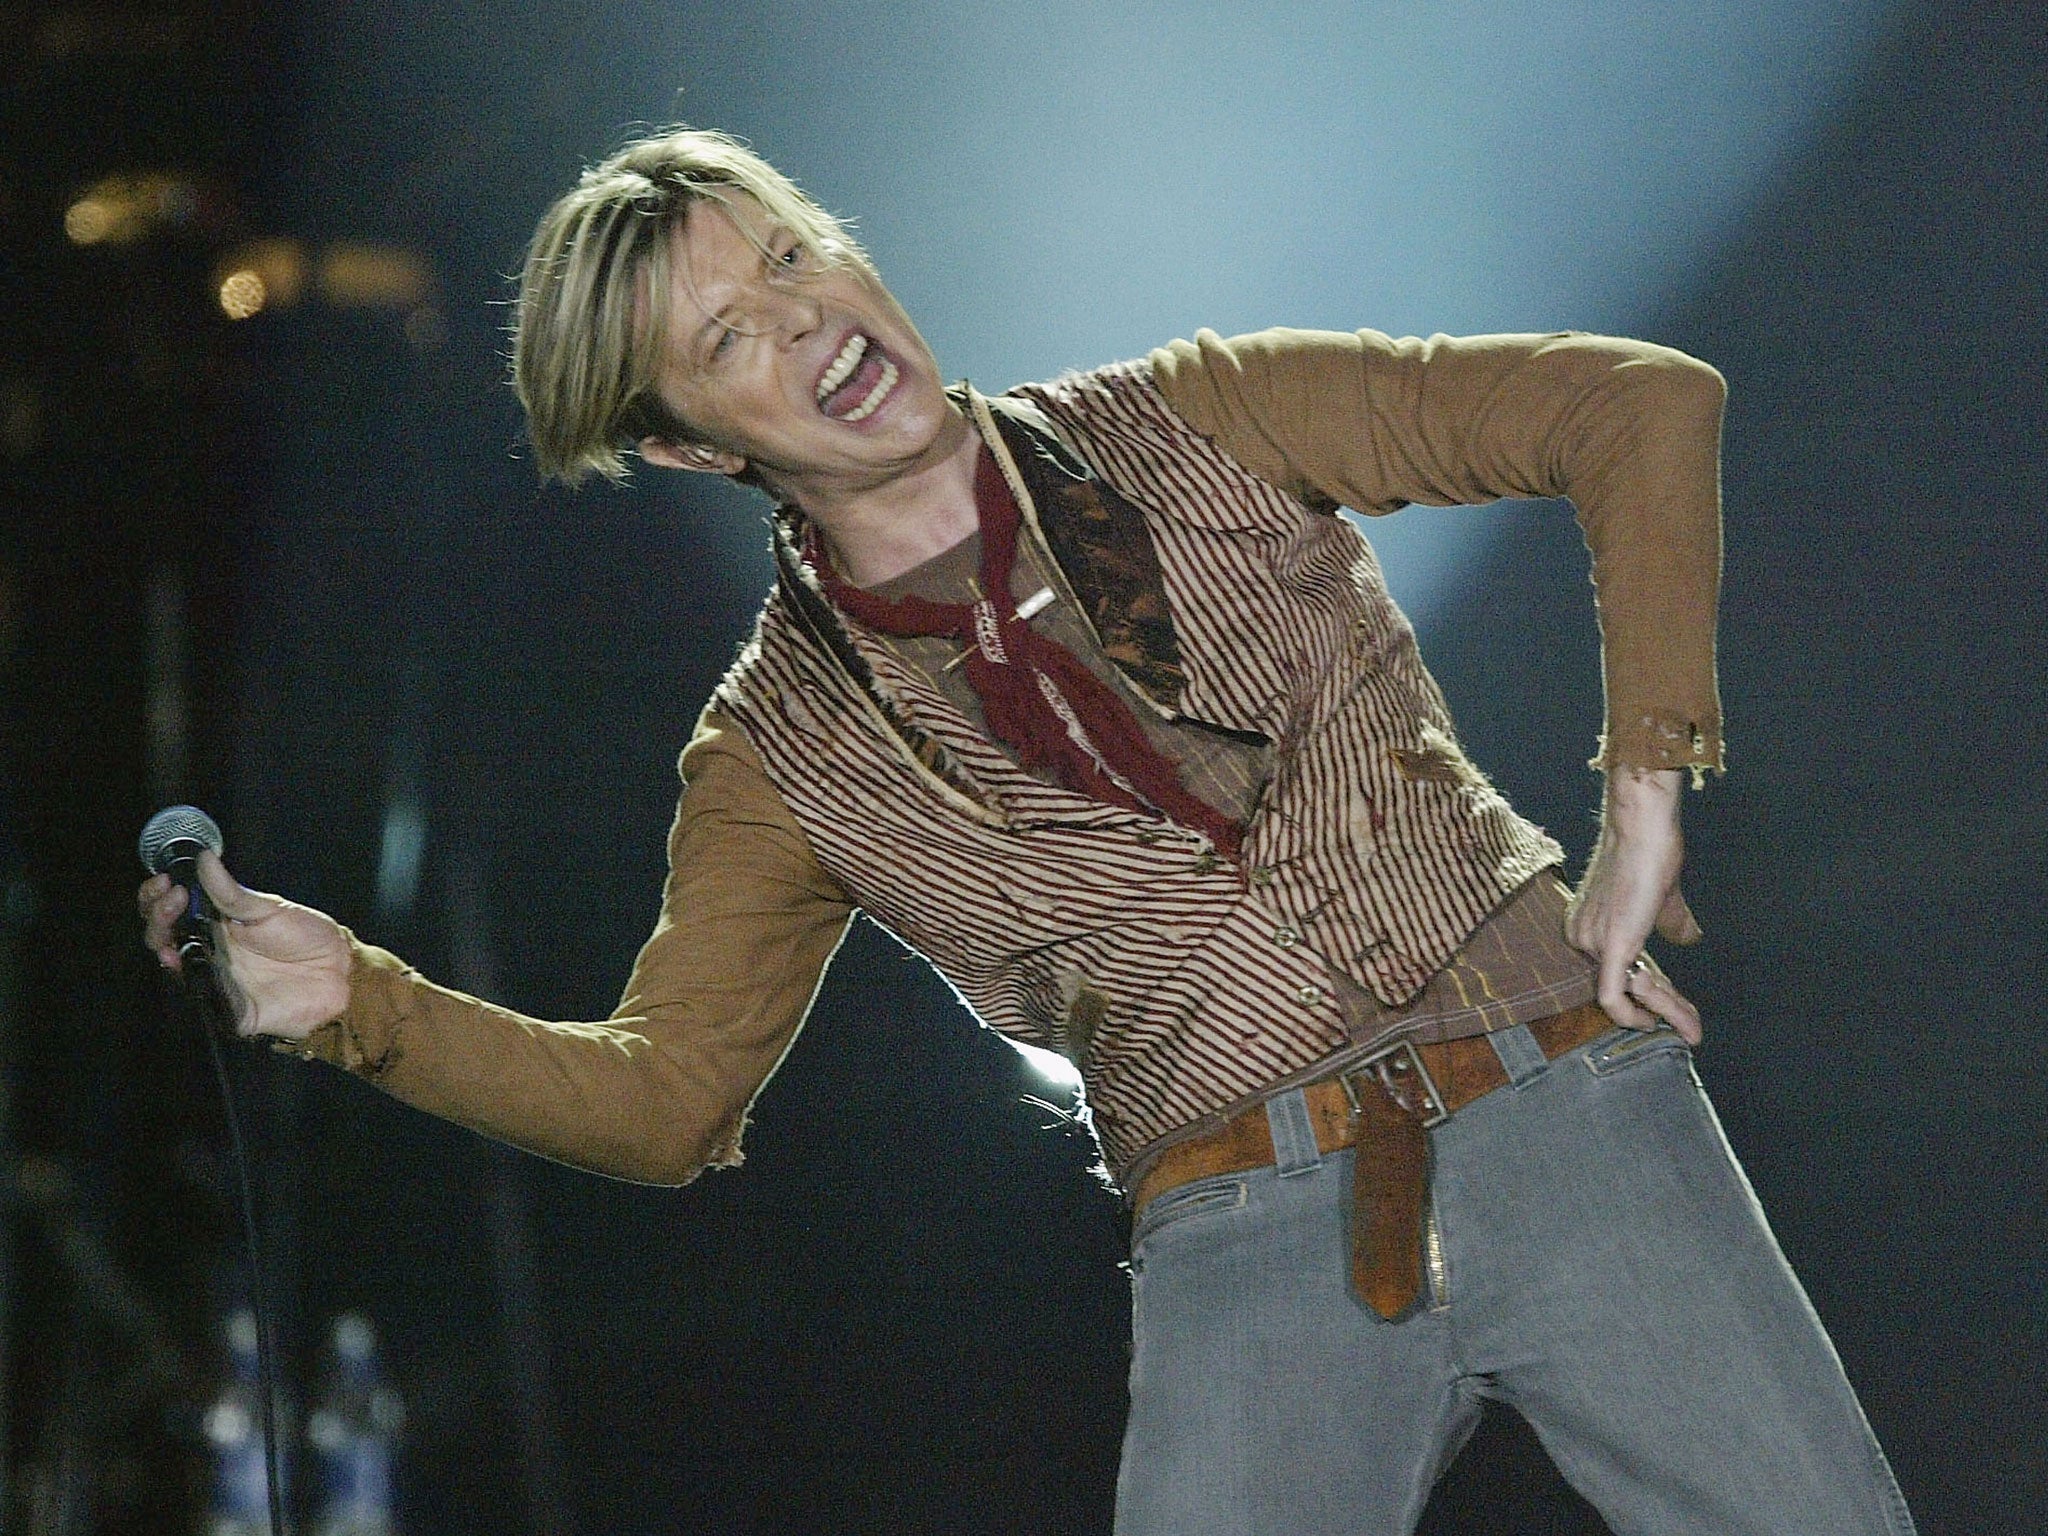 David Bowie performs on the first night of his UK tour at the MEN Arena on November 17, 2003 in Manchester, England.